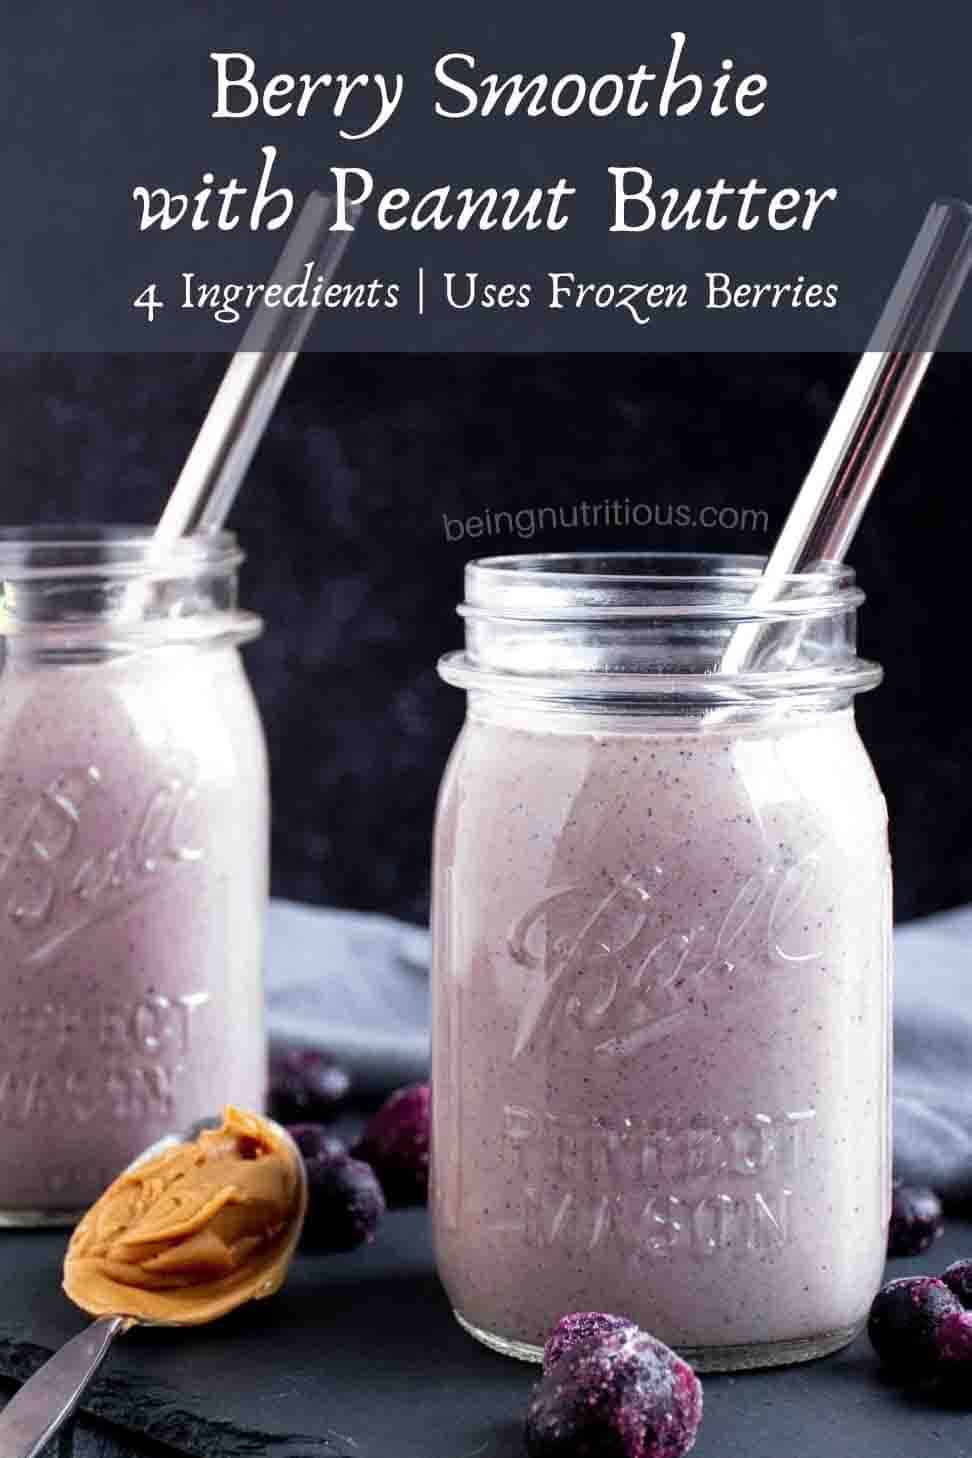 Smoothie in a mason jar, with frozen berries scattered around the outside, and a spoon with peanut butter on it. Text overlay: Berry Smoothie with Peanut Butter; 4 ingredients, uses frozen berries.